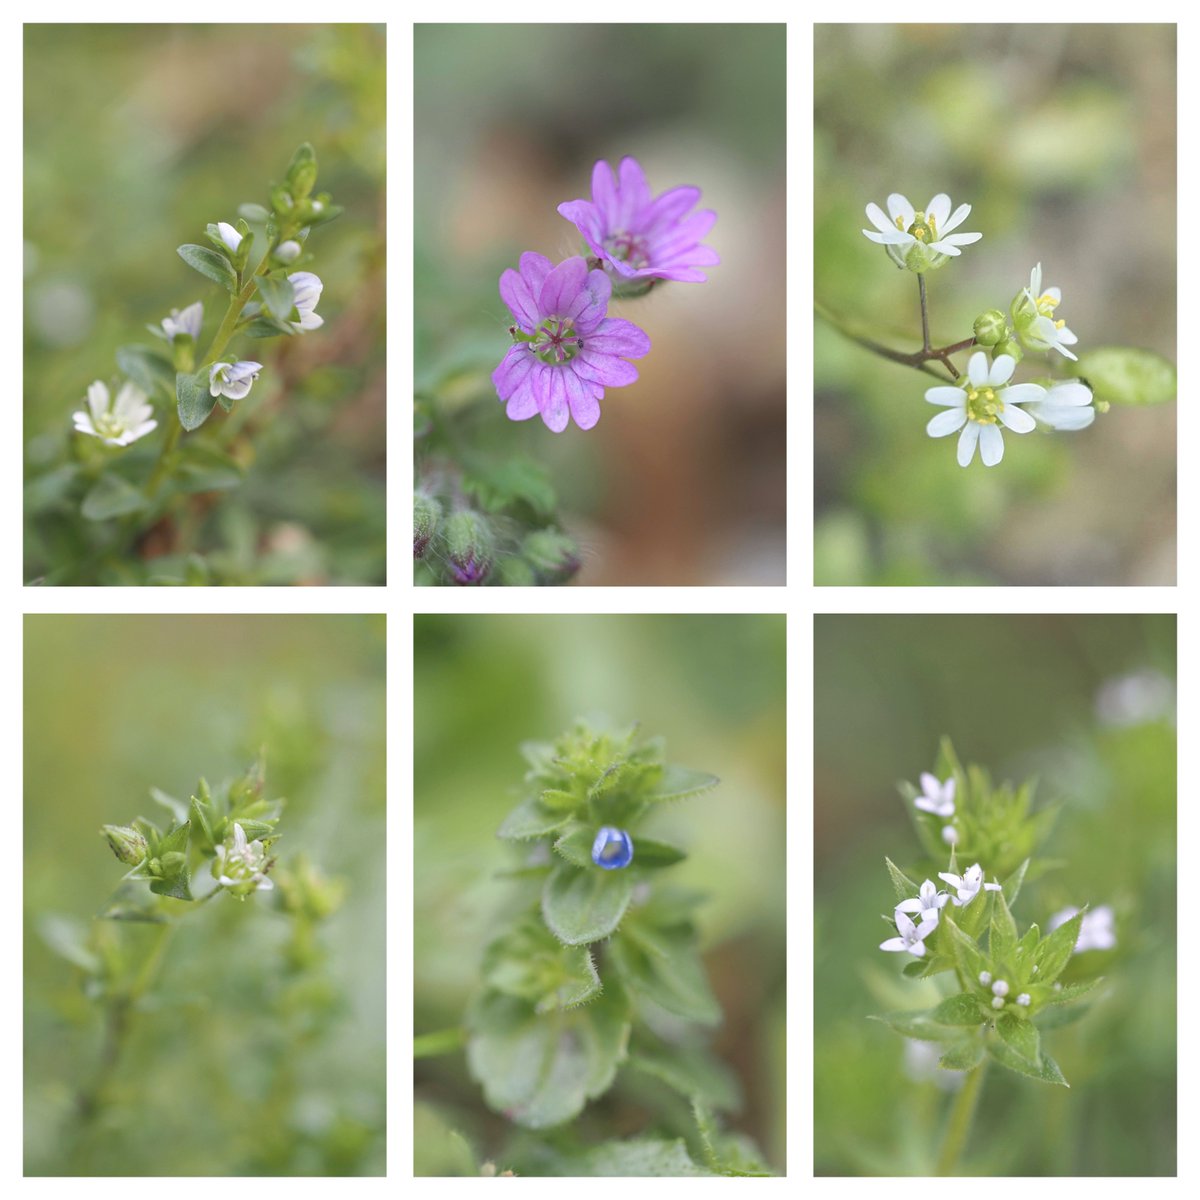 Tiny flowers spotted in the grounds of @theUL this week. Common mouse-ear and Thyme-leaved speedwell, Dovesfoot cranesbill, Common whitlowgrass, Thyme-leaved sandwort, Wall speedwell and Field madder. #WildflowerHour